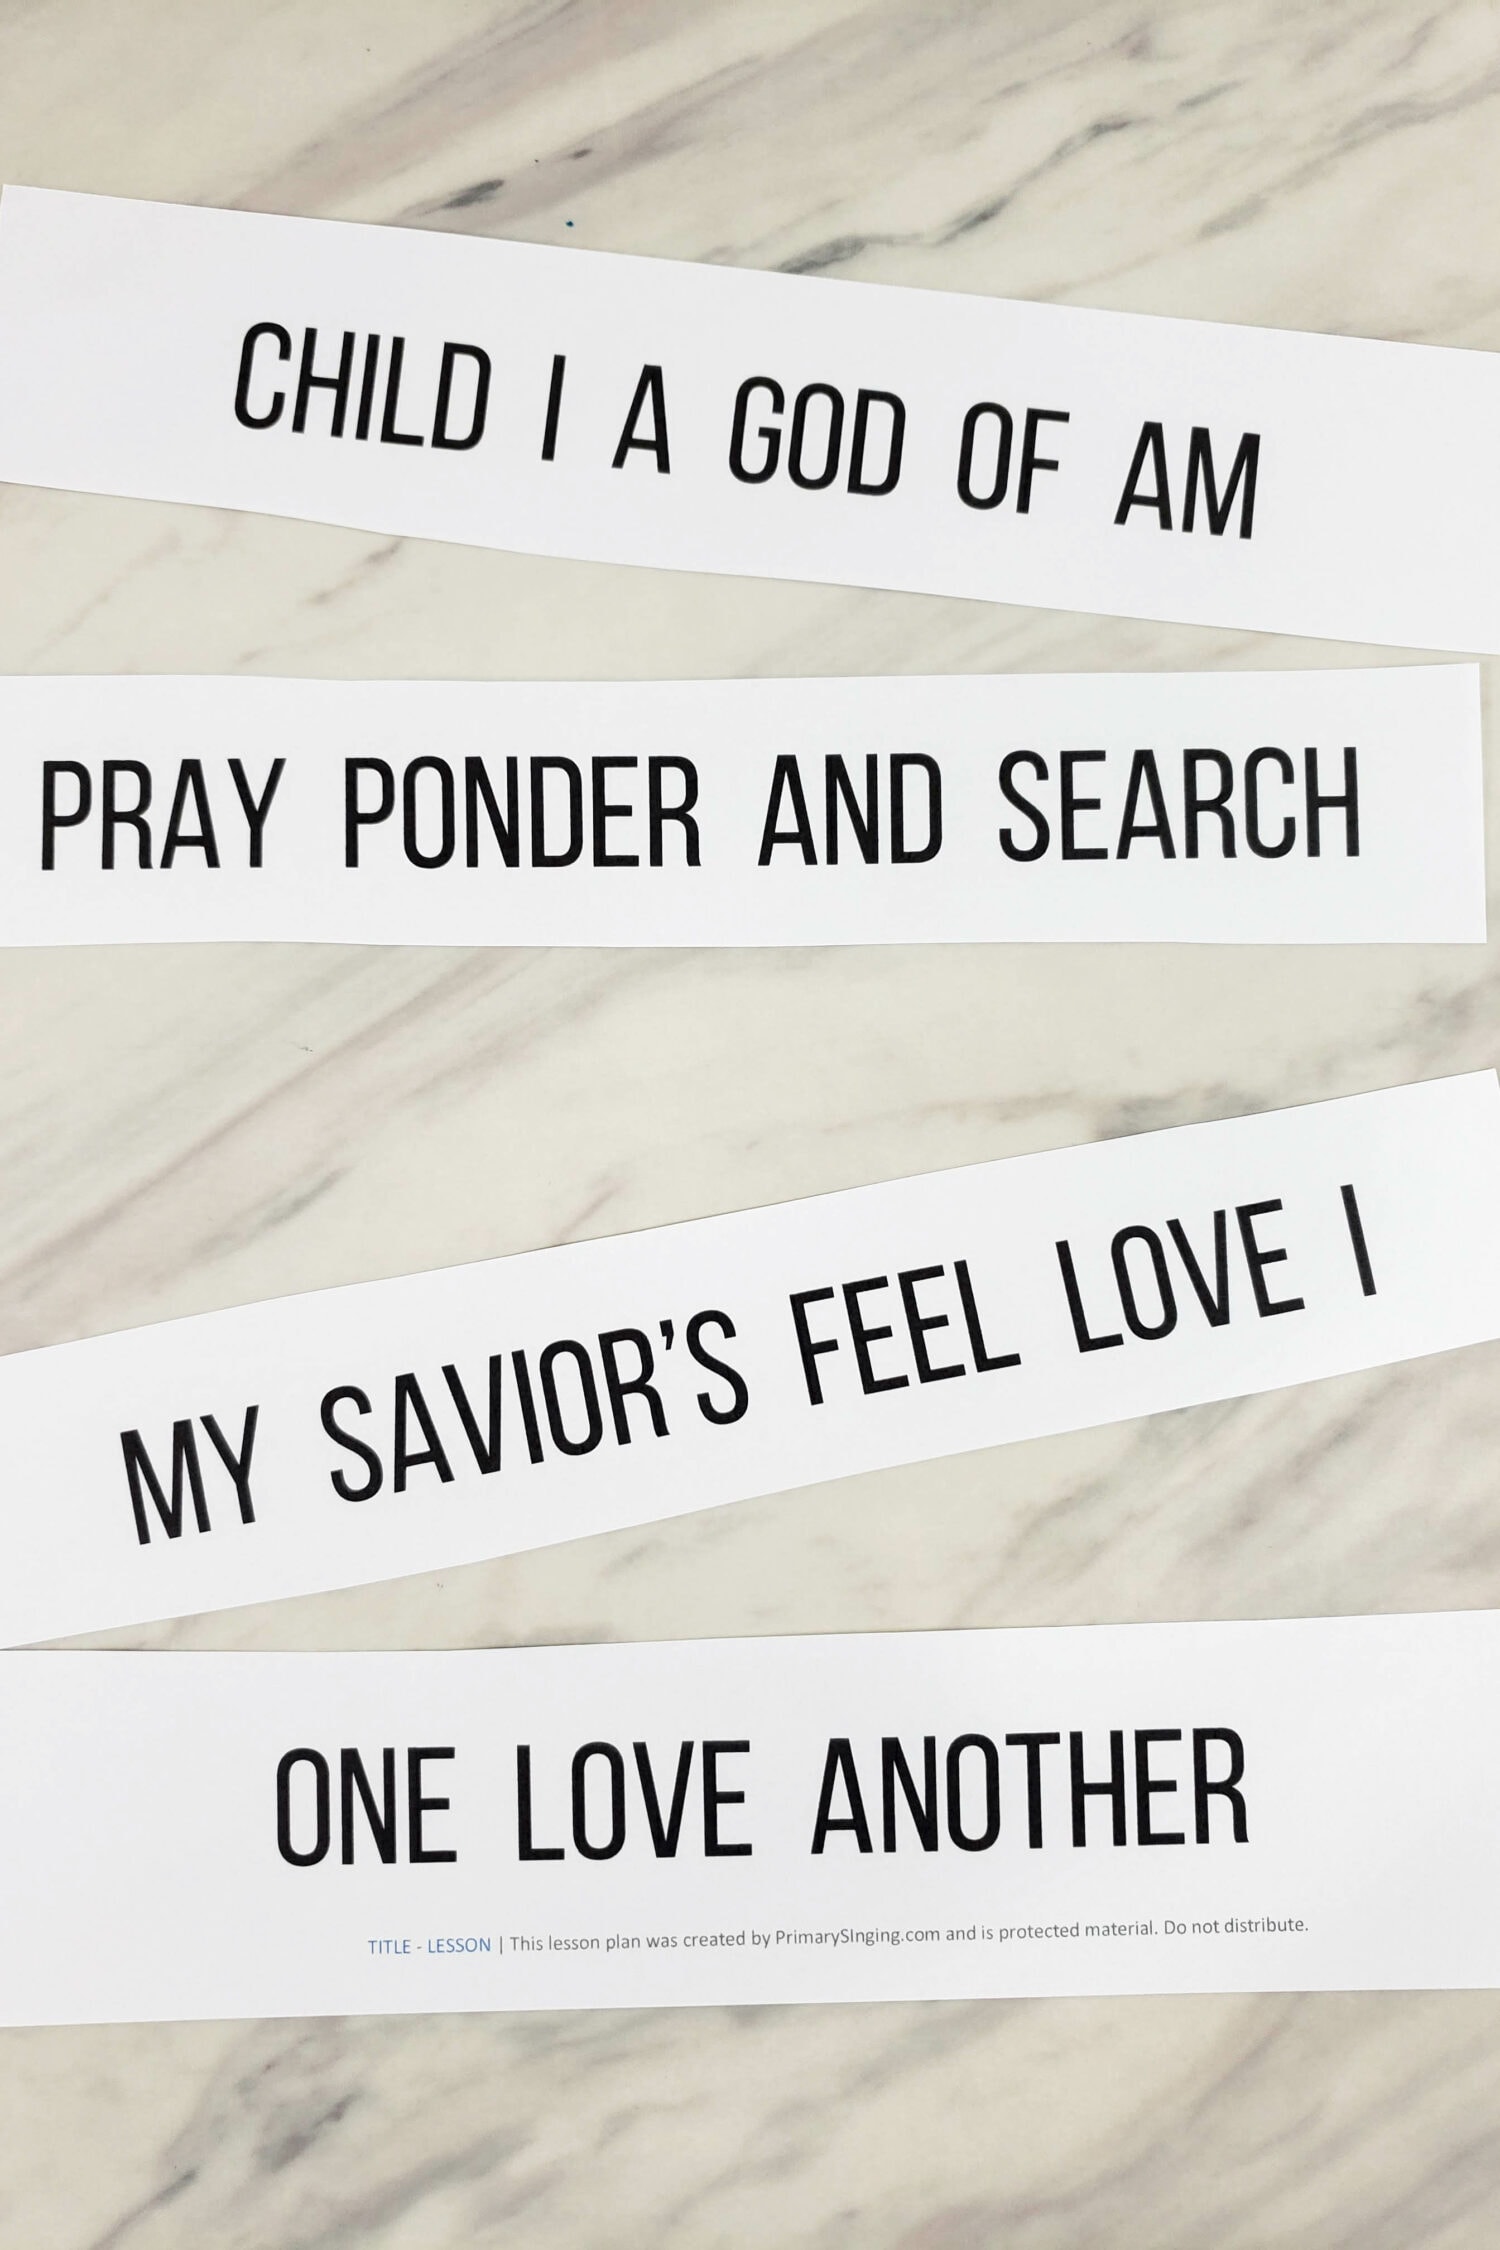 Primary Song Scramble singing time review game for LDS Primary music leaders. Grab this printable activity with 12 preselected songs great for the Old Testament or add your own song list. Scramble words or letters in this engaging game.